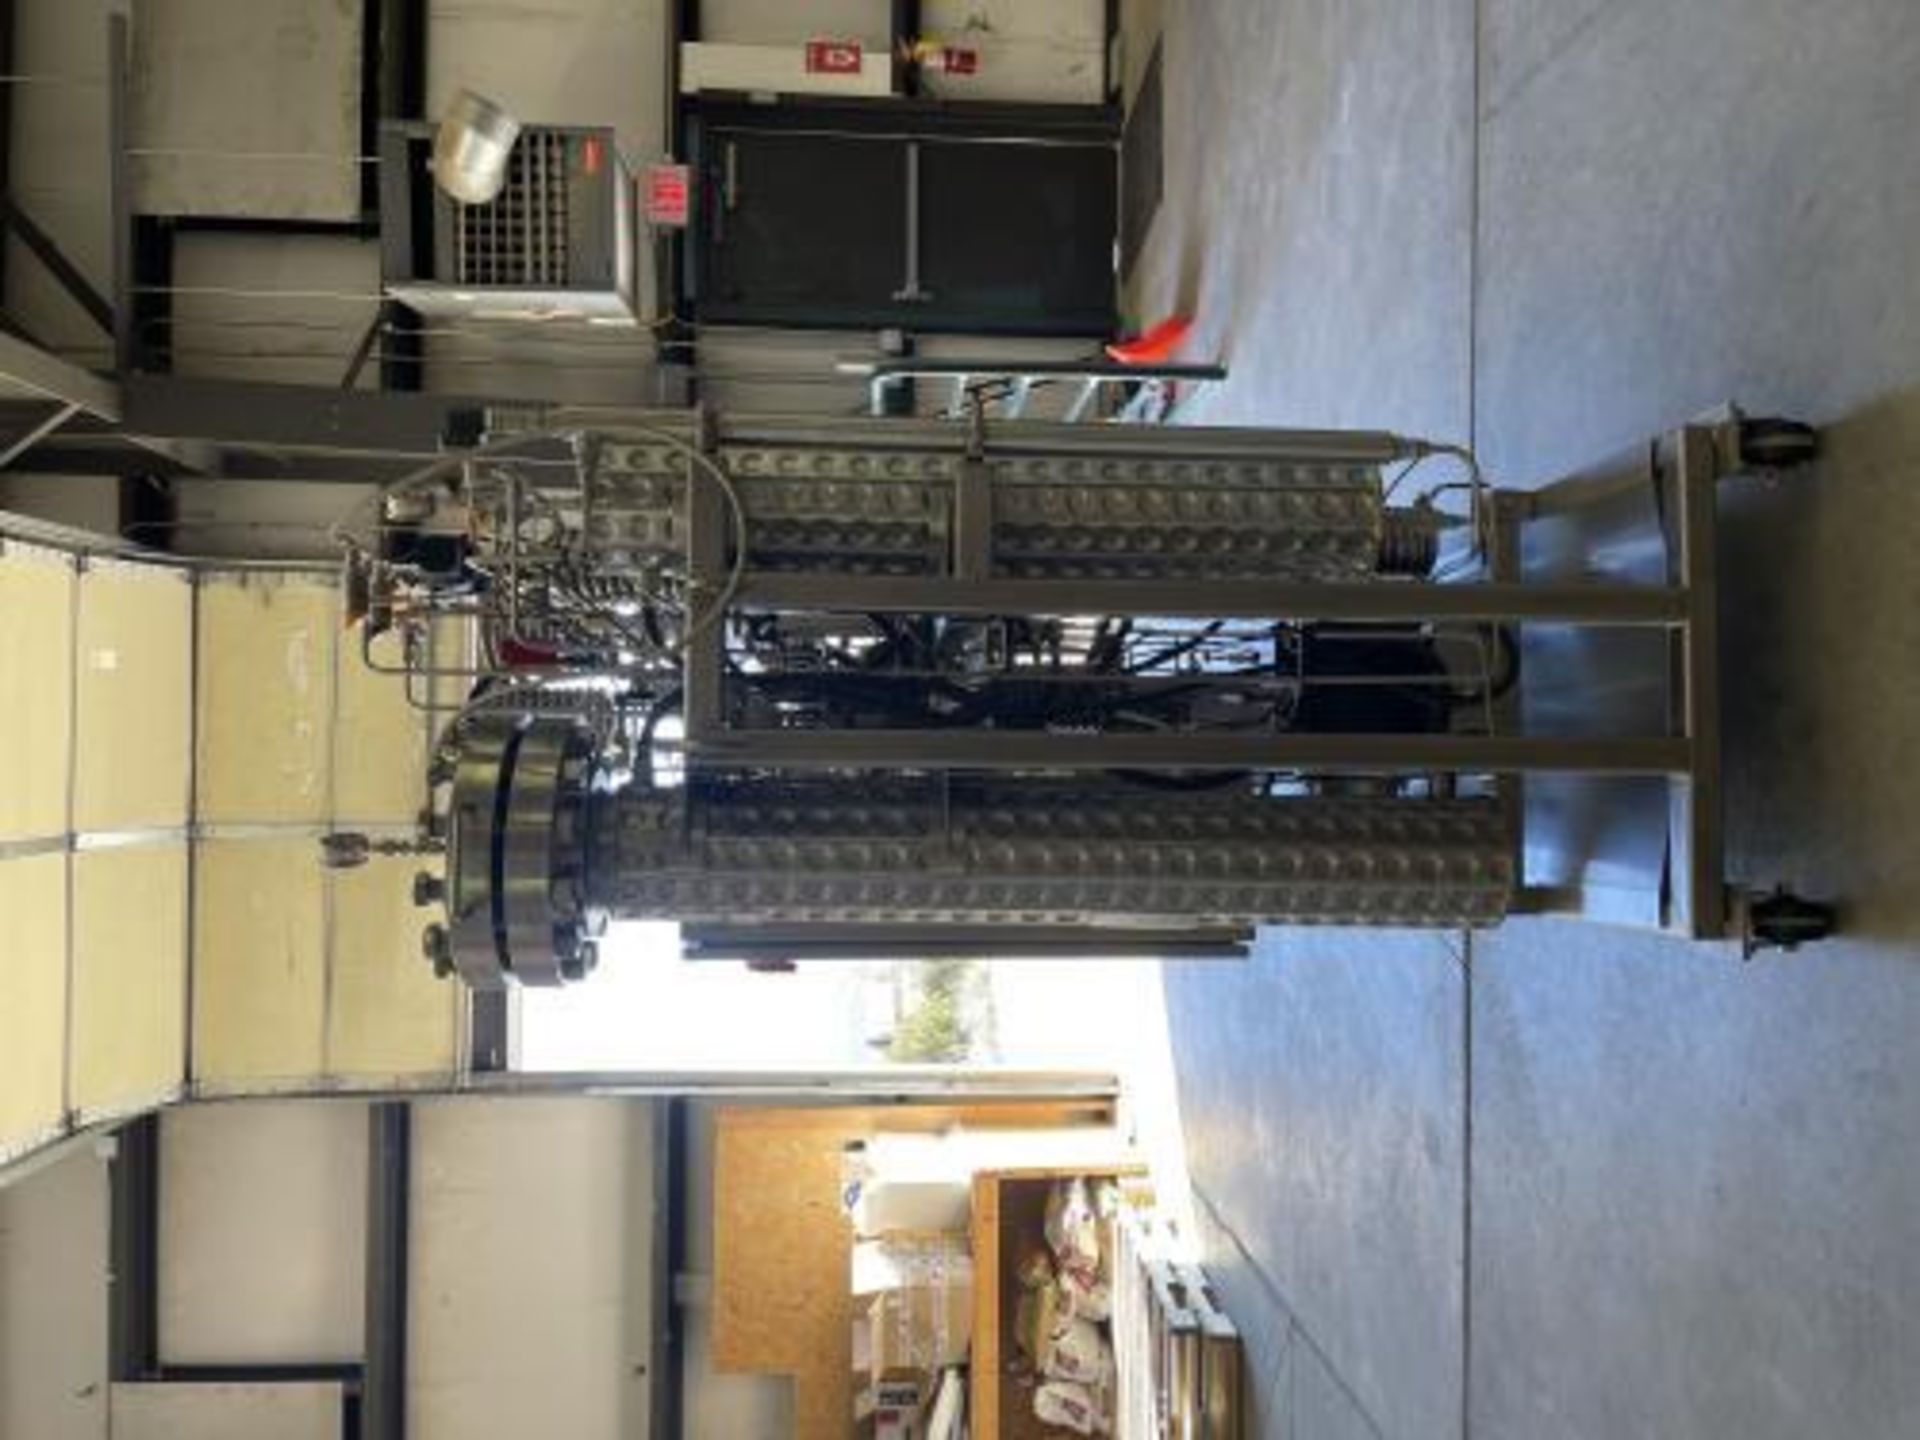 MRX 20 LE Supercritical CO2 Automated Extractor System - Image 14 of 41